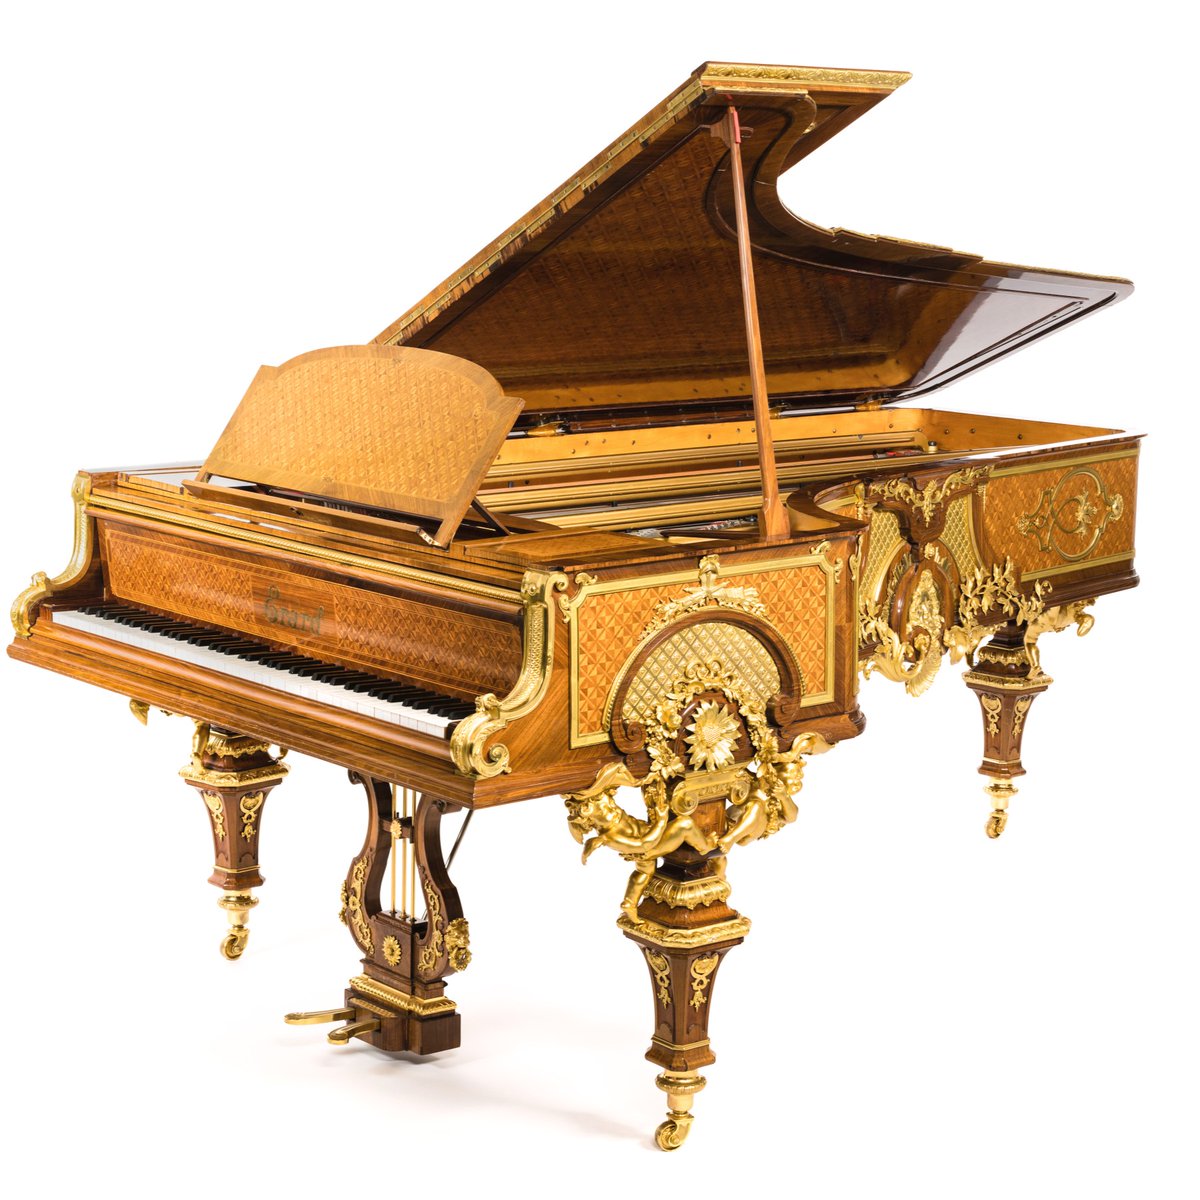 Happy #WorldPianoDay! This stunning gilt-bronze grand piano, made by the Erard company, was a standout highlight at the same international world’s fair that showcased the Eiffel Tower, the 1889 Paris Exposition. Gift of the Robert J. Ulrich and Diane Sillik Fund